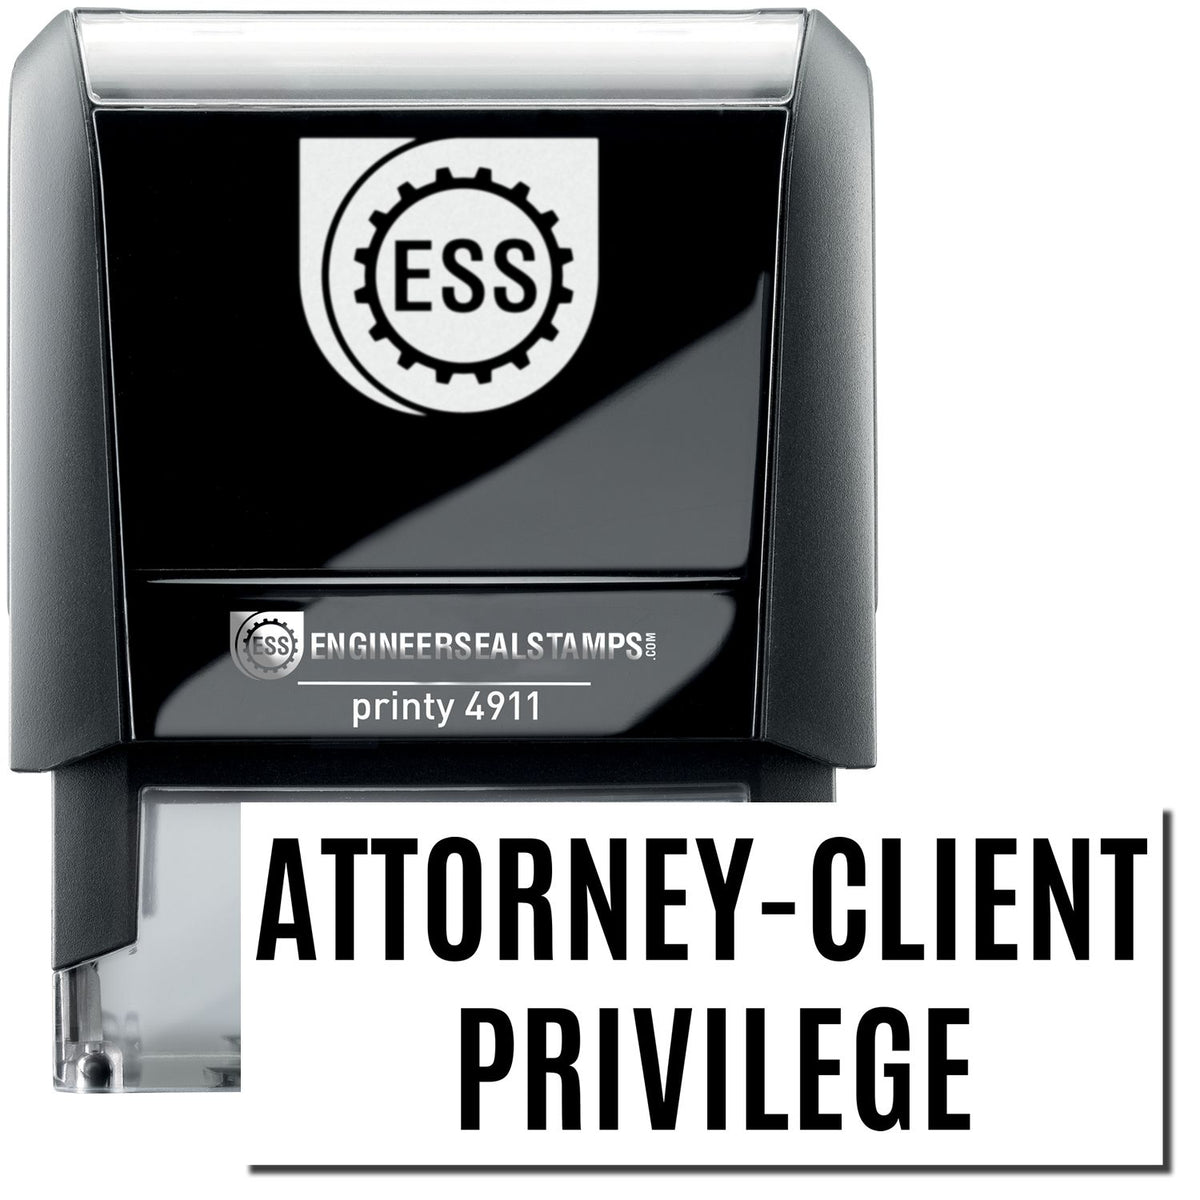 A self-inking stamp with a stamped image showing how the text &quot;ATTORNEY-CLIENT PRIVILEGE&quot; is displayed after stamping.